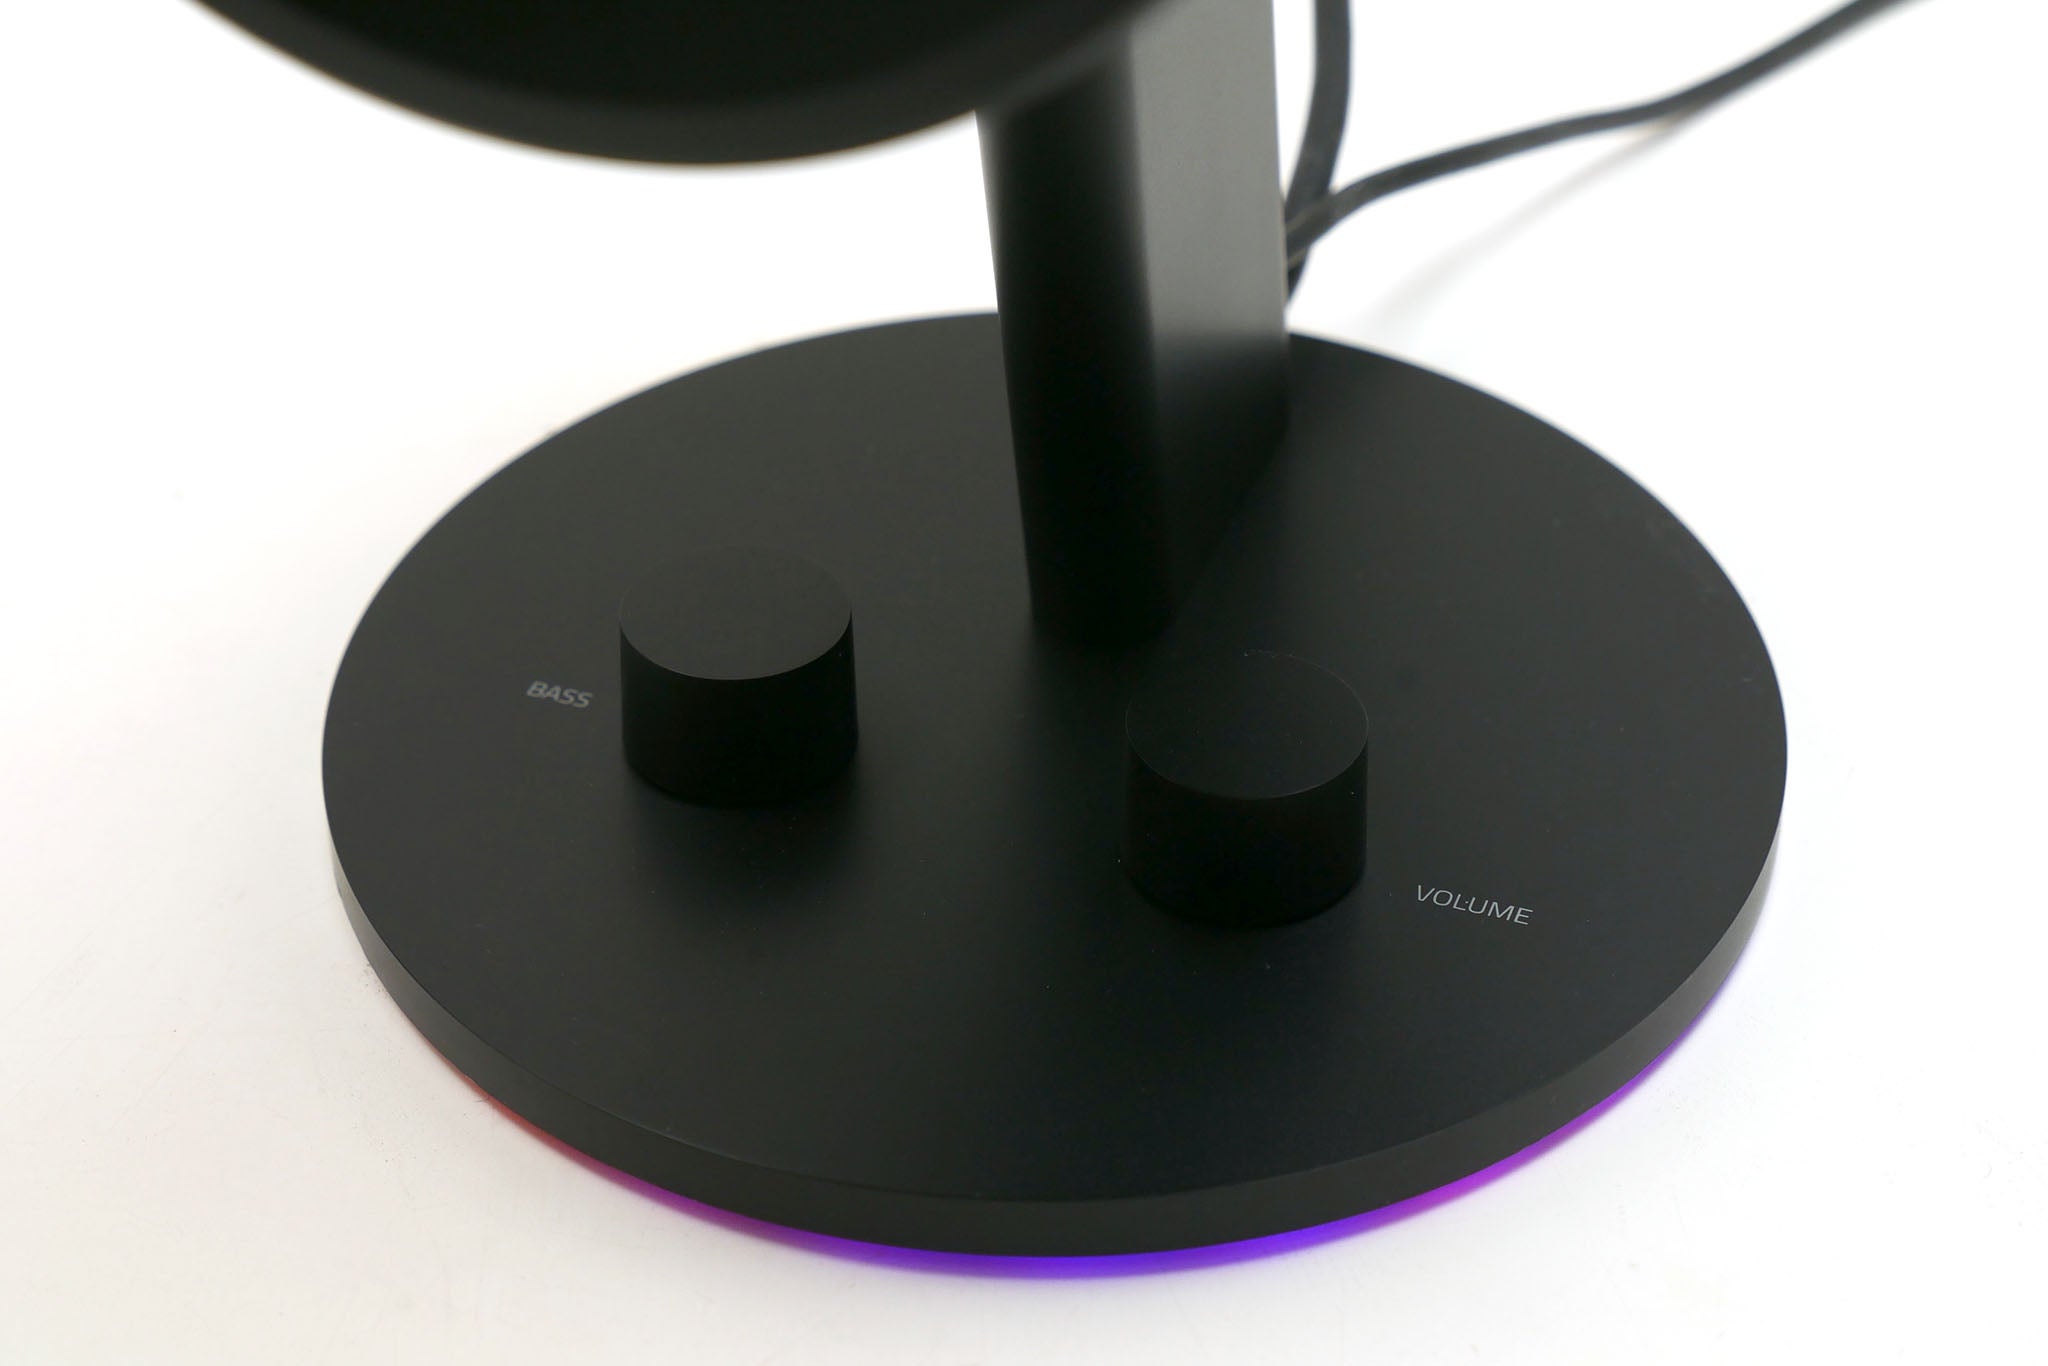 Razer Nommo Chroma speaker base with bass and volume control dials.